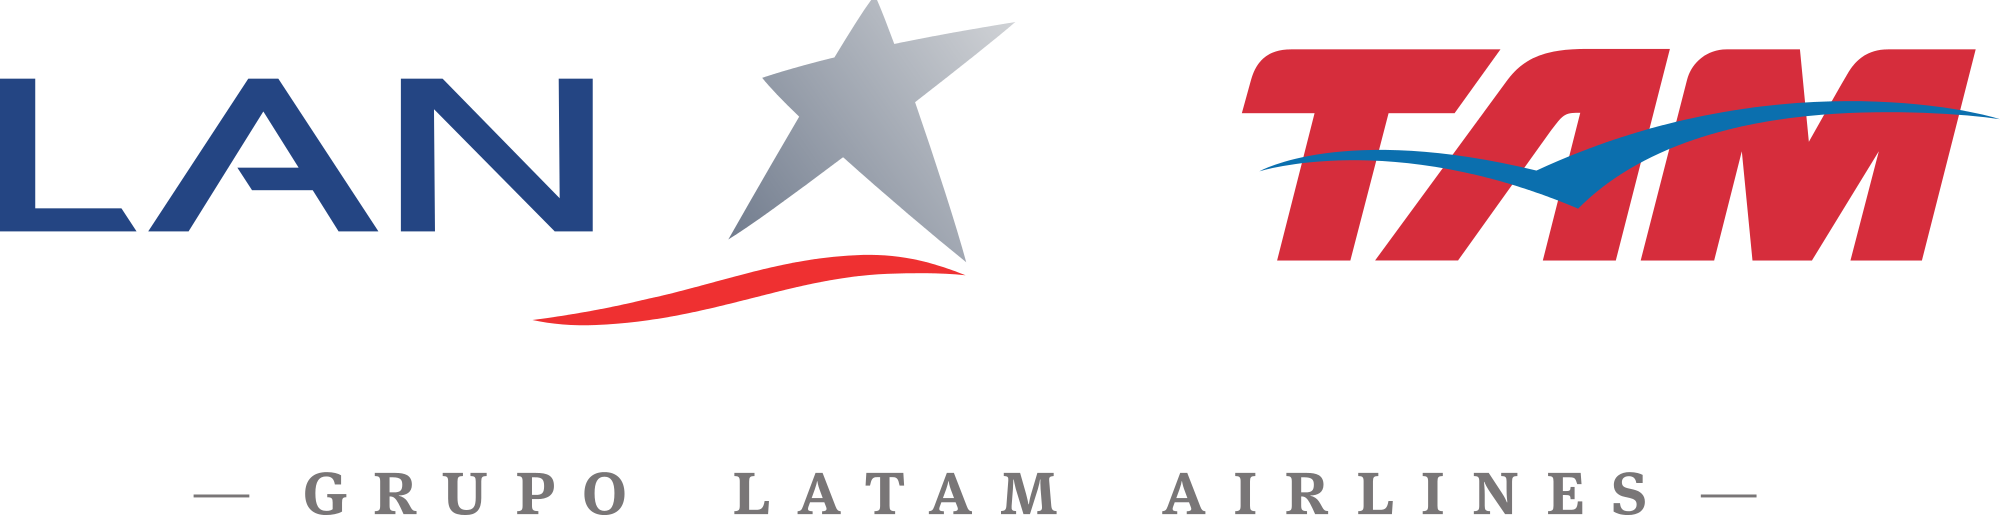 Latam Airlines PNG - 36788